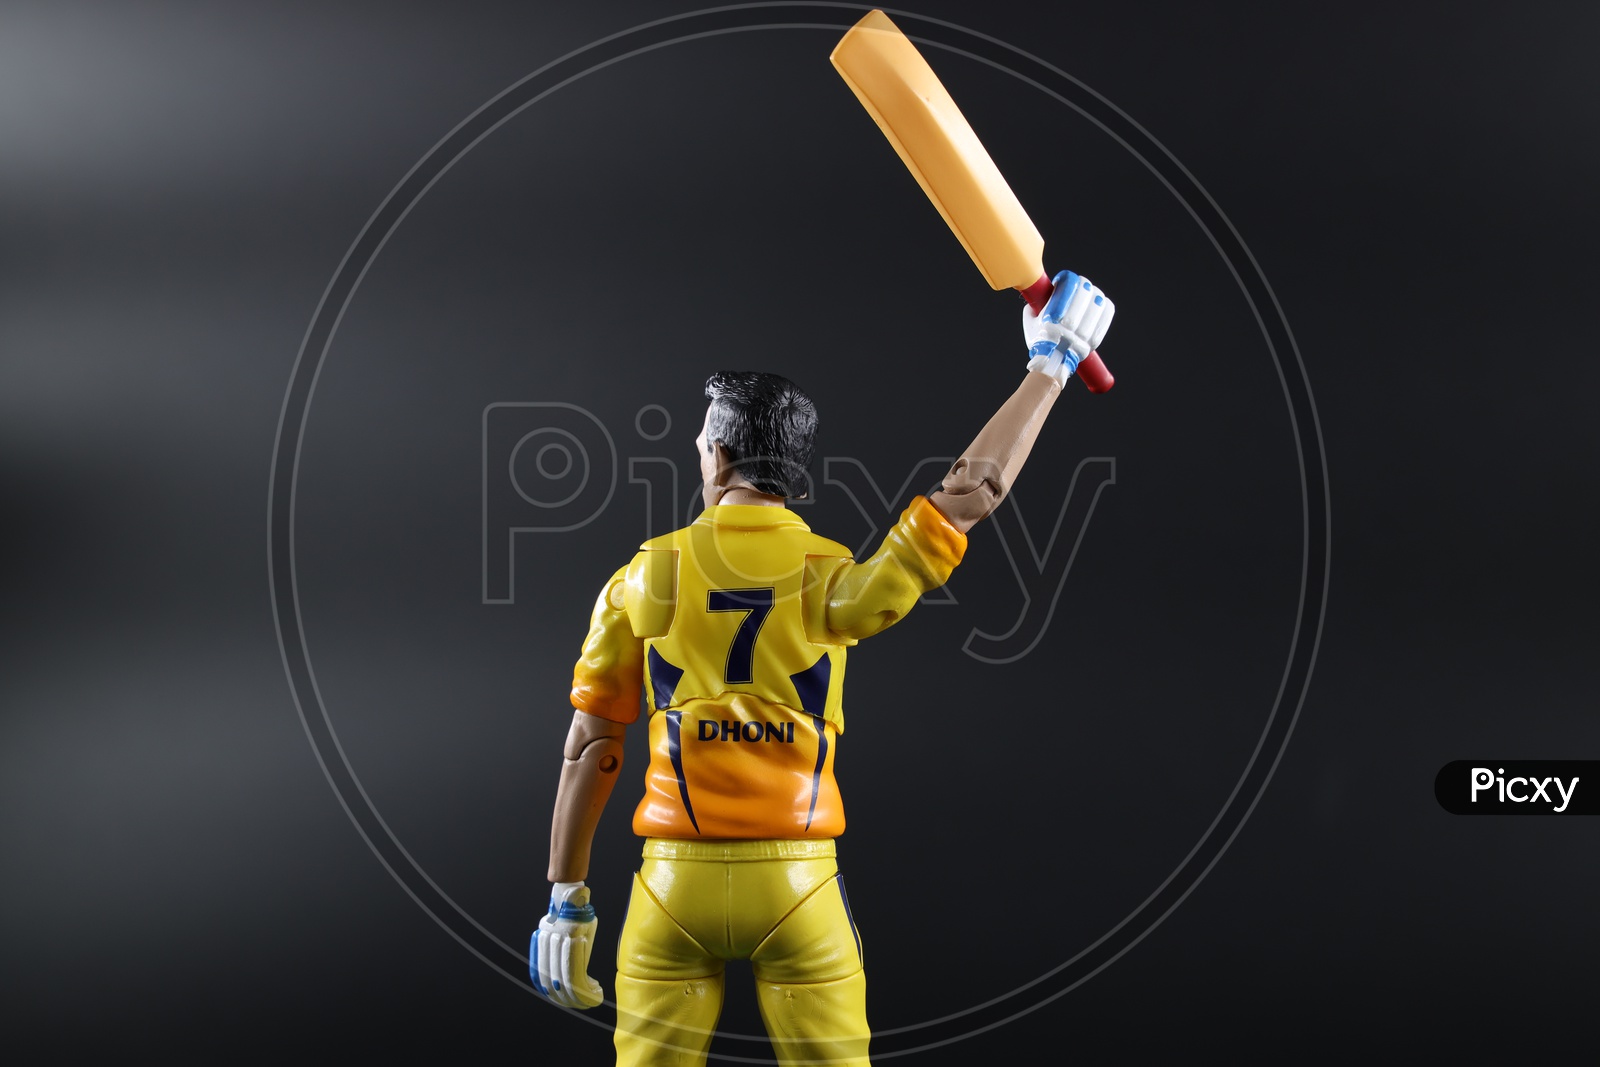 MS Dhoni  in CSK Jersey  Action Figure  or Toy  On an Isolated Black Background